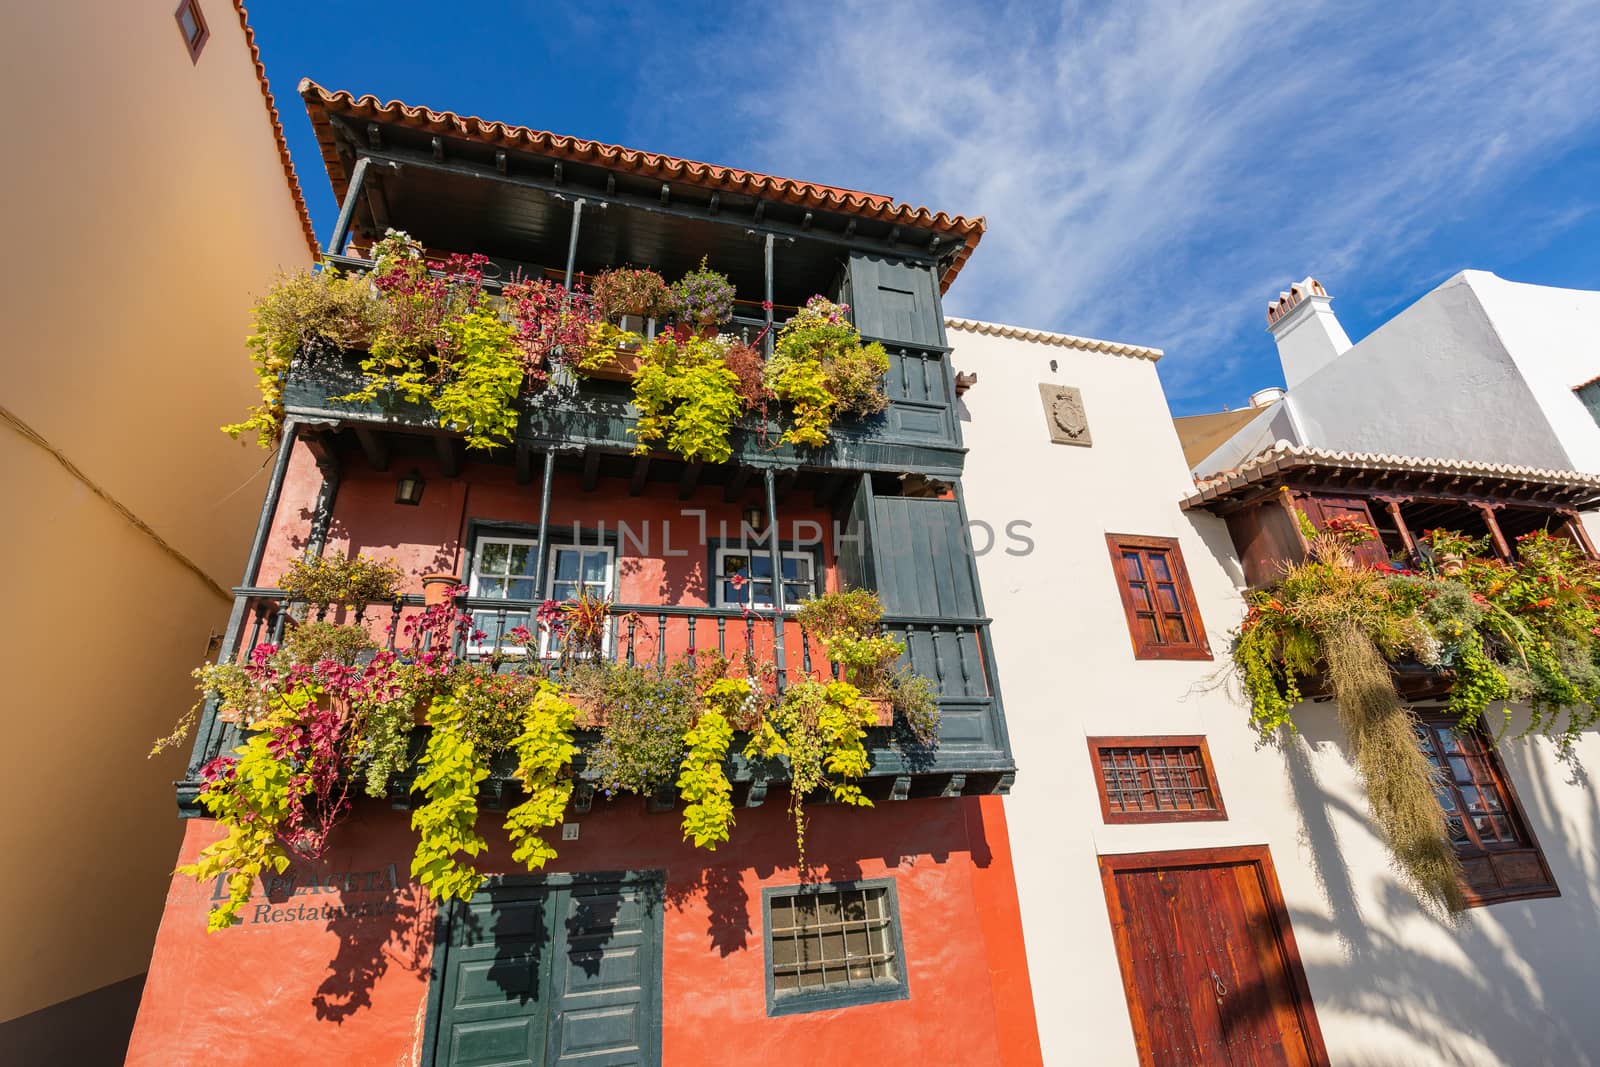 Famous ancient colorful balconies decorated with flowers in La Palma, Canary Islands, Spain.